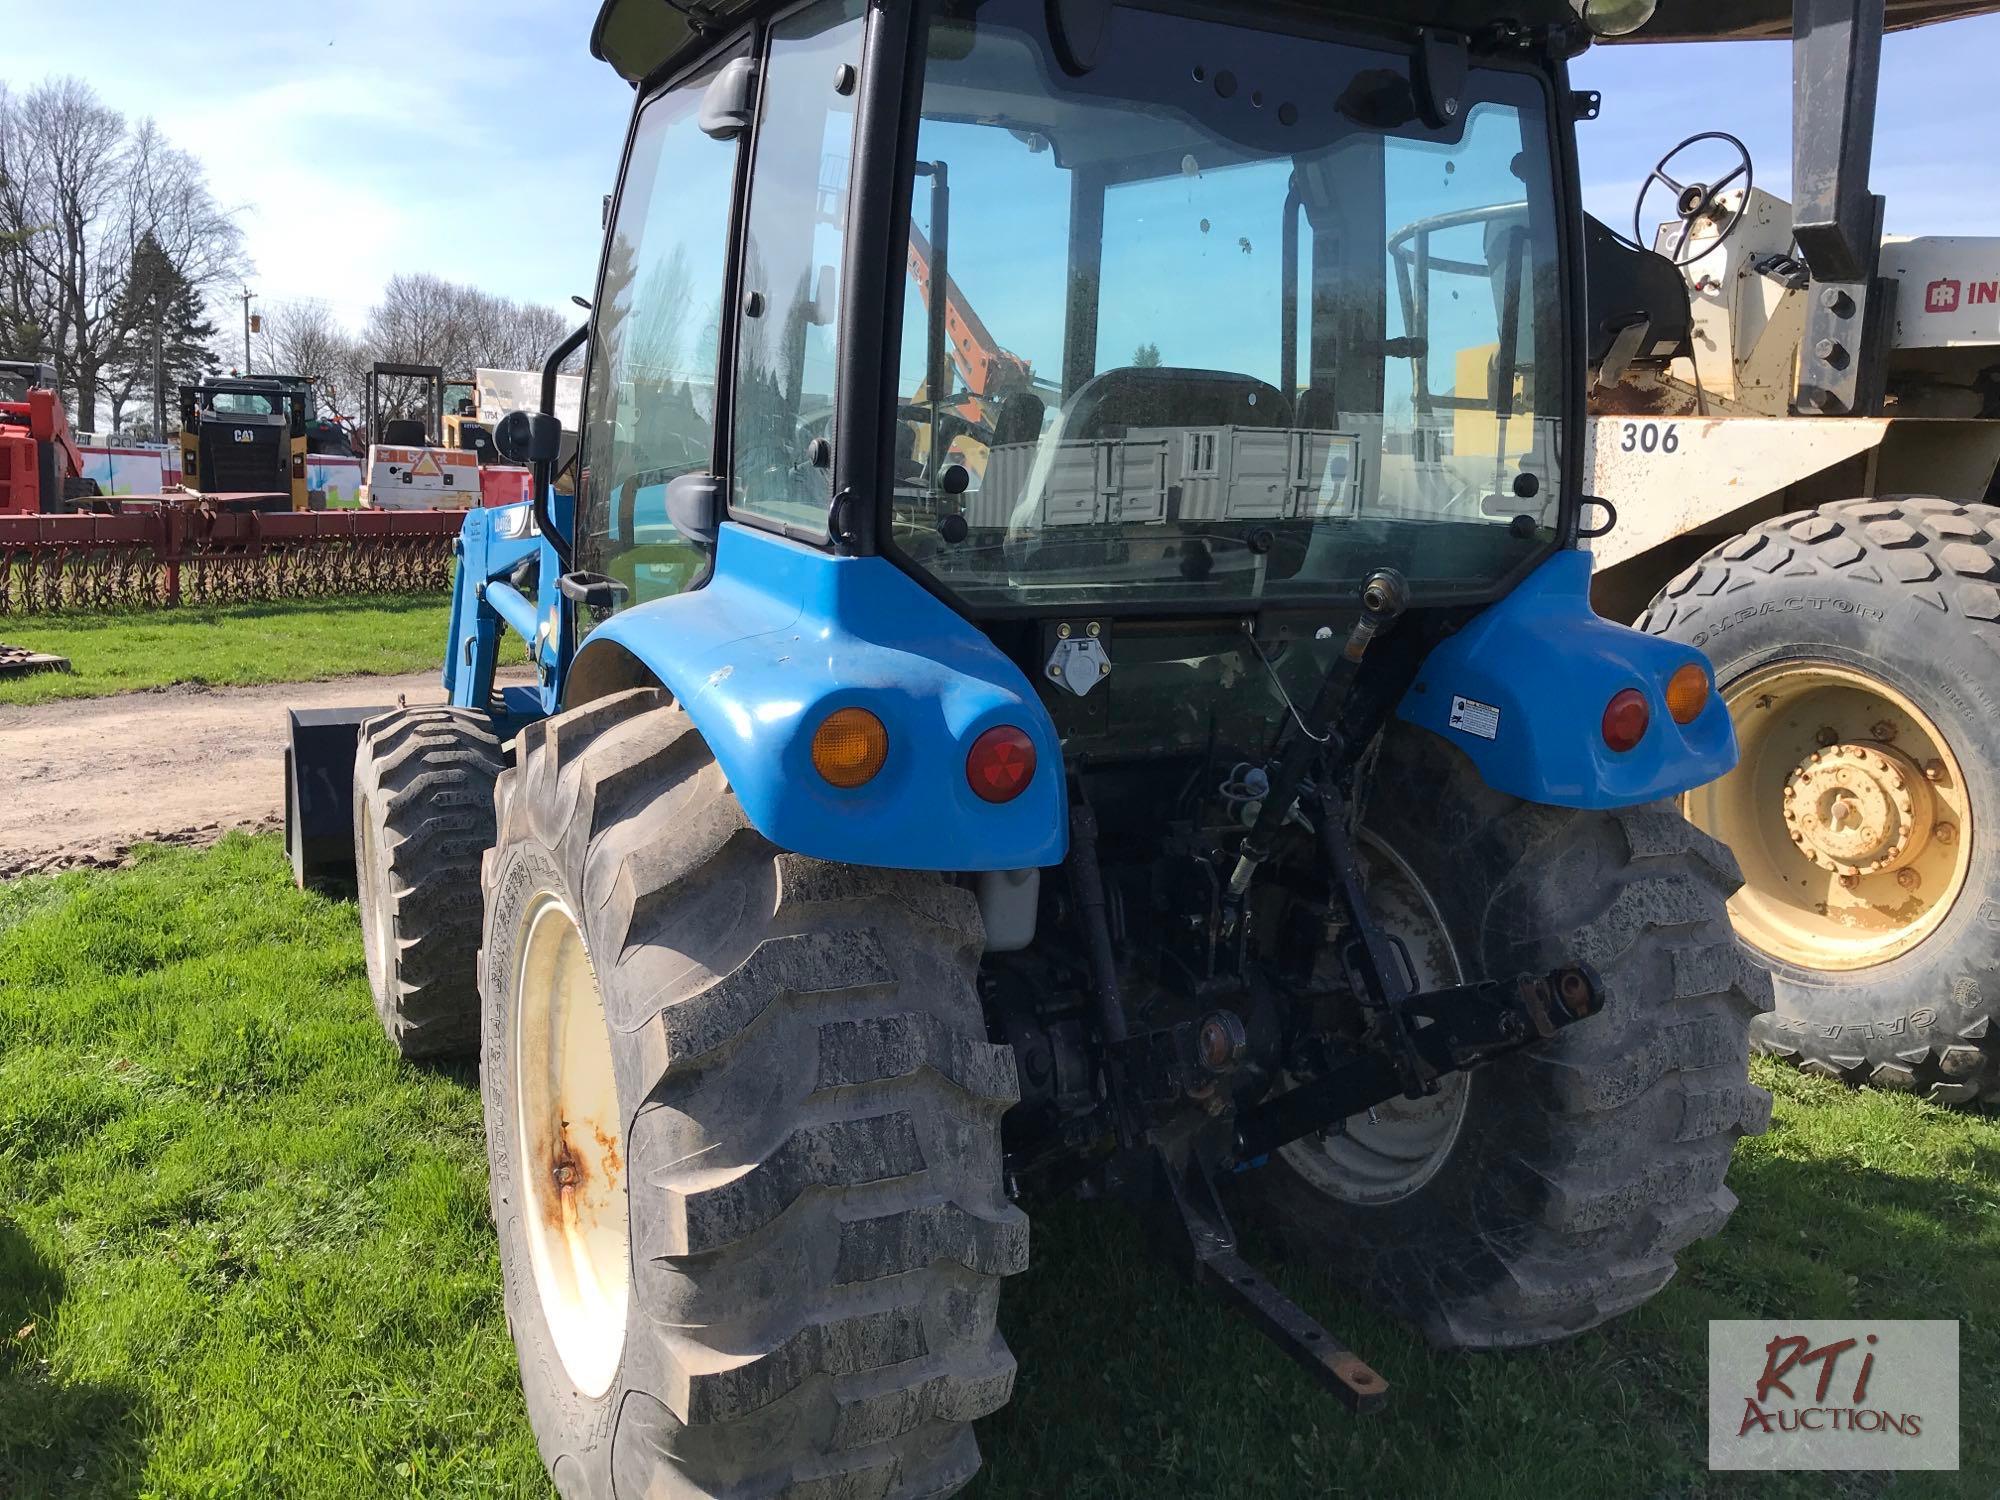 LS XR44H 4WD tractor with cab, 461 hrs. with LL4102 loader and quick attach bucket, needs windshield